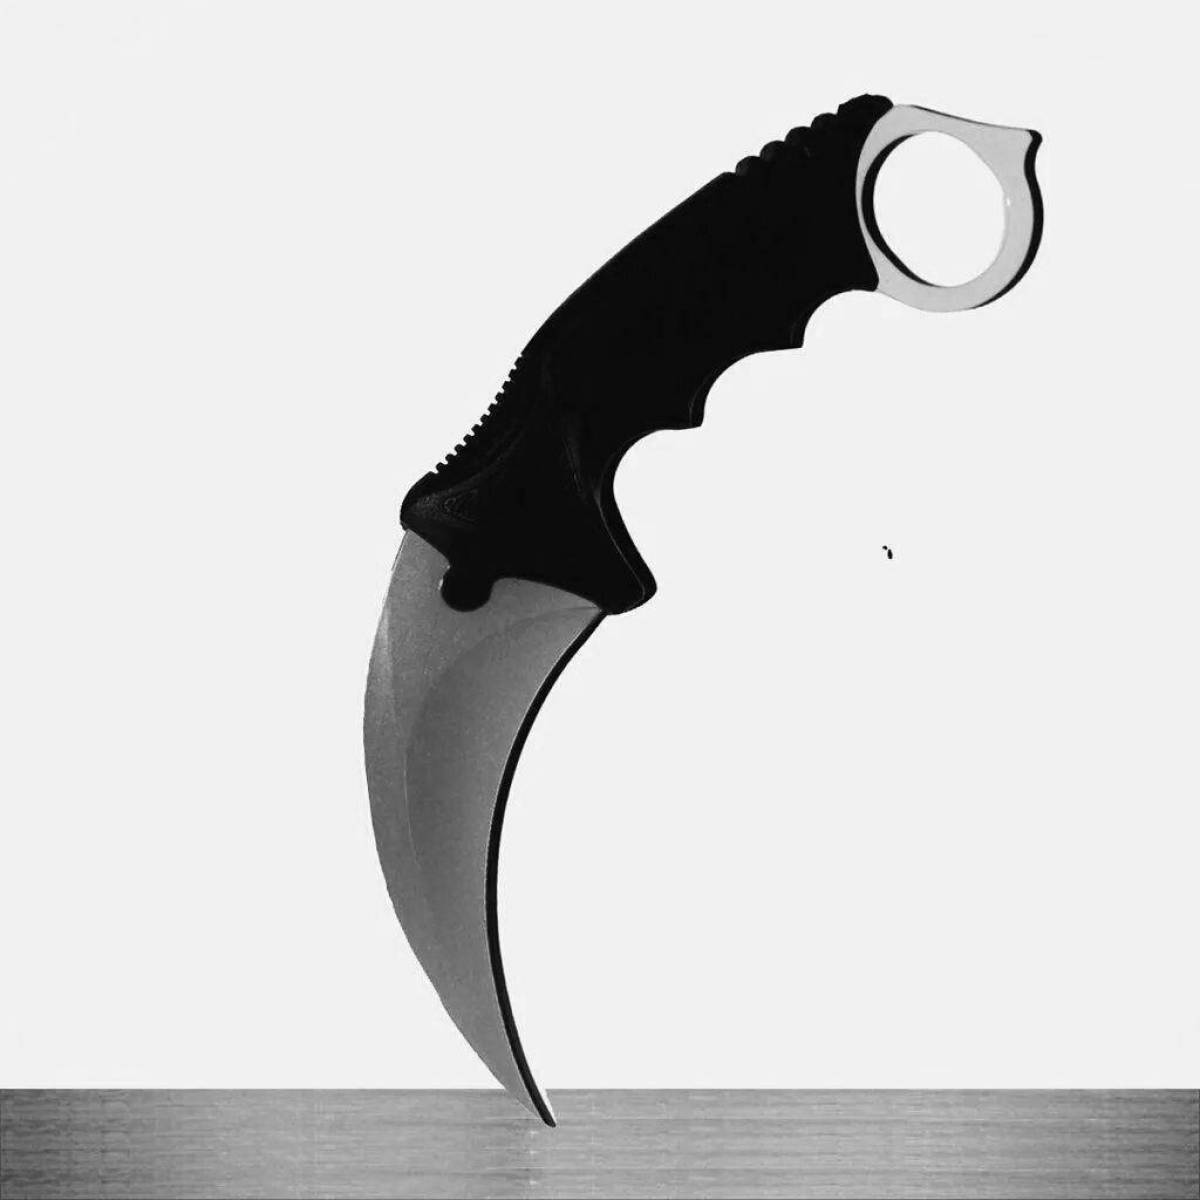 Charambit from standoff